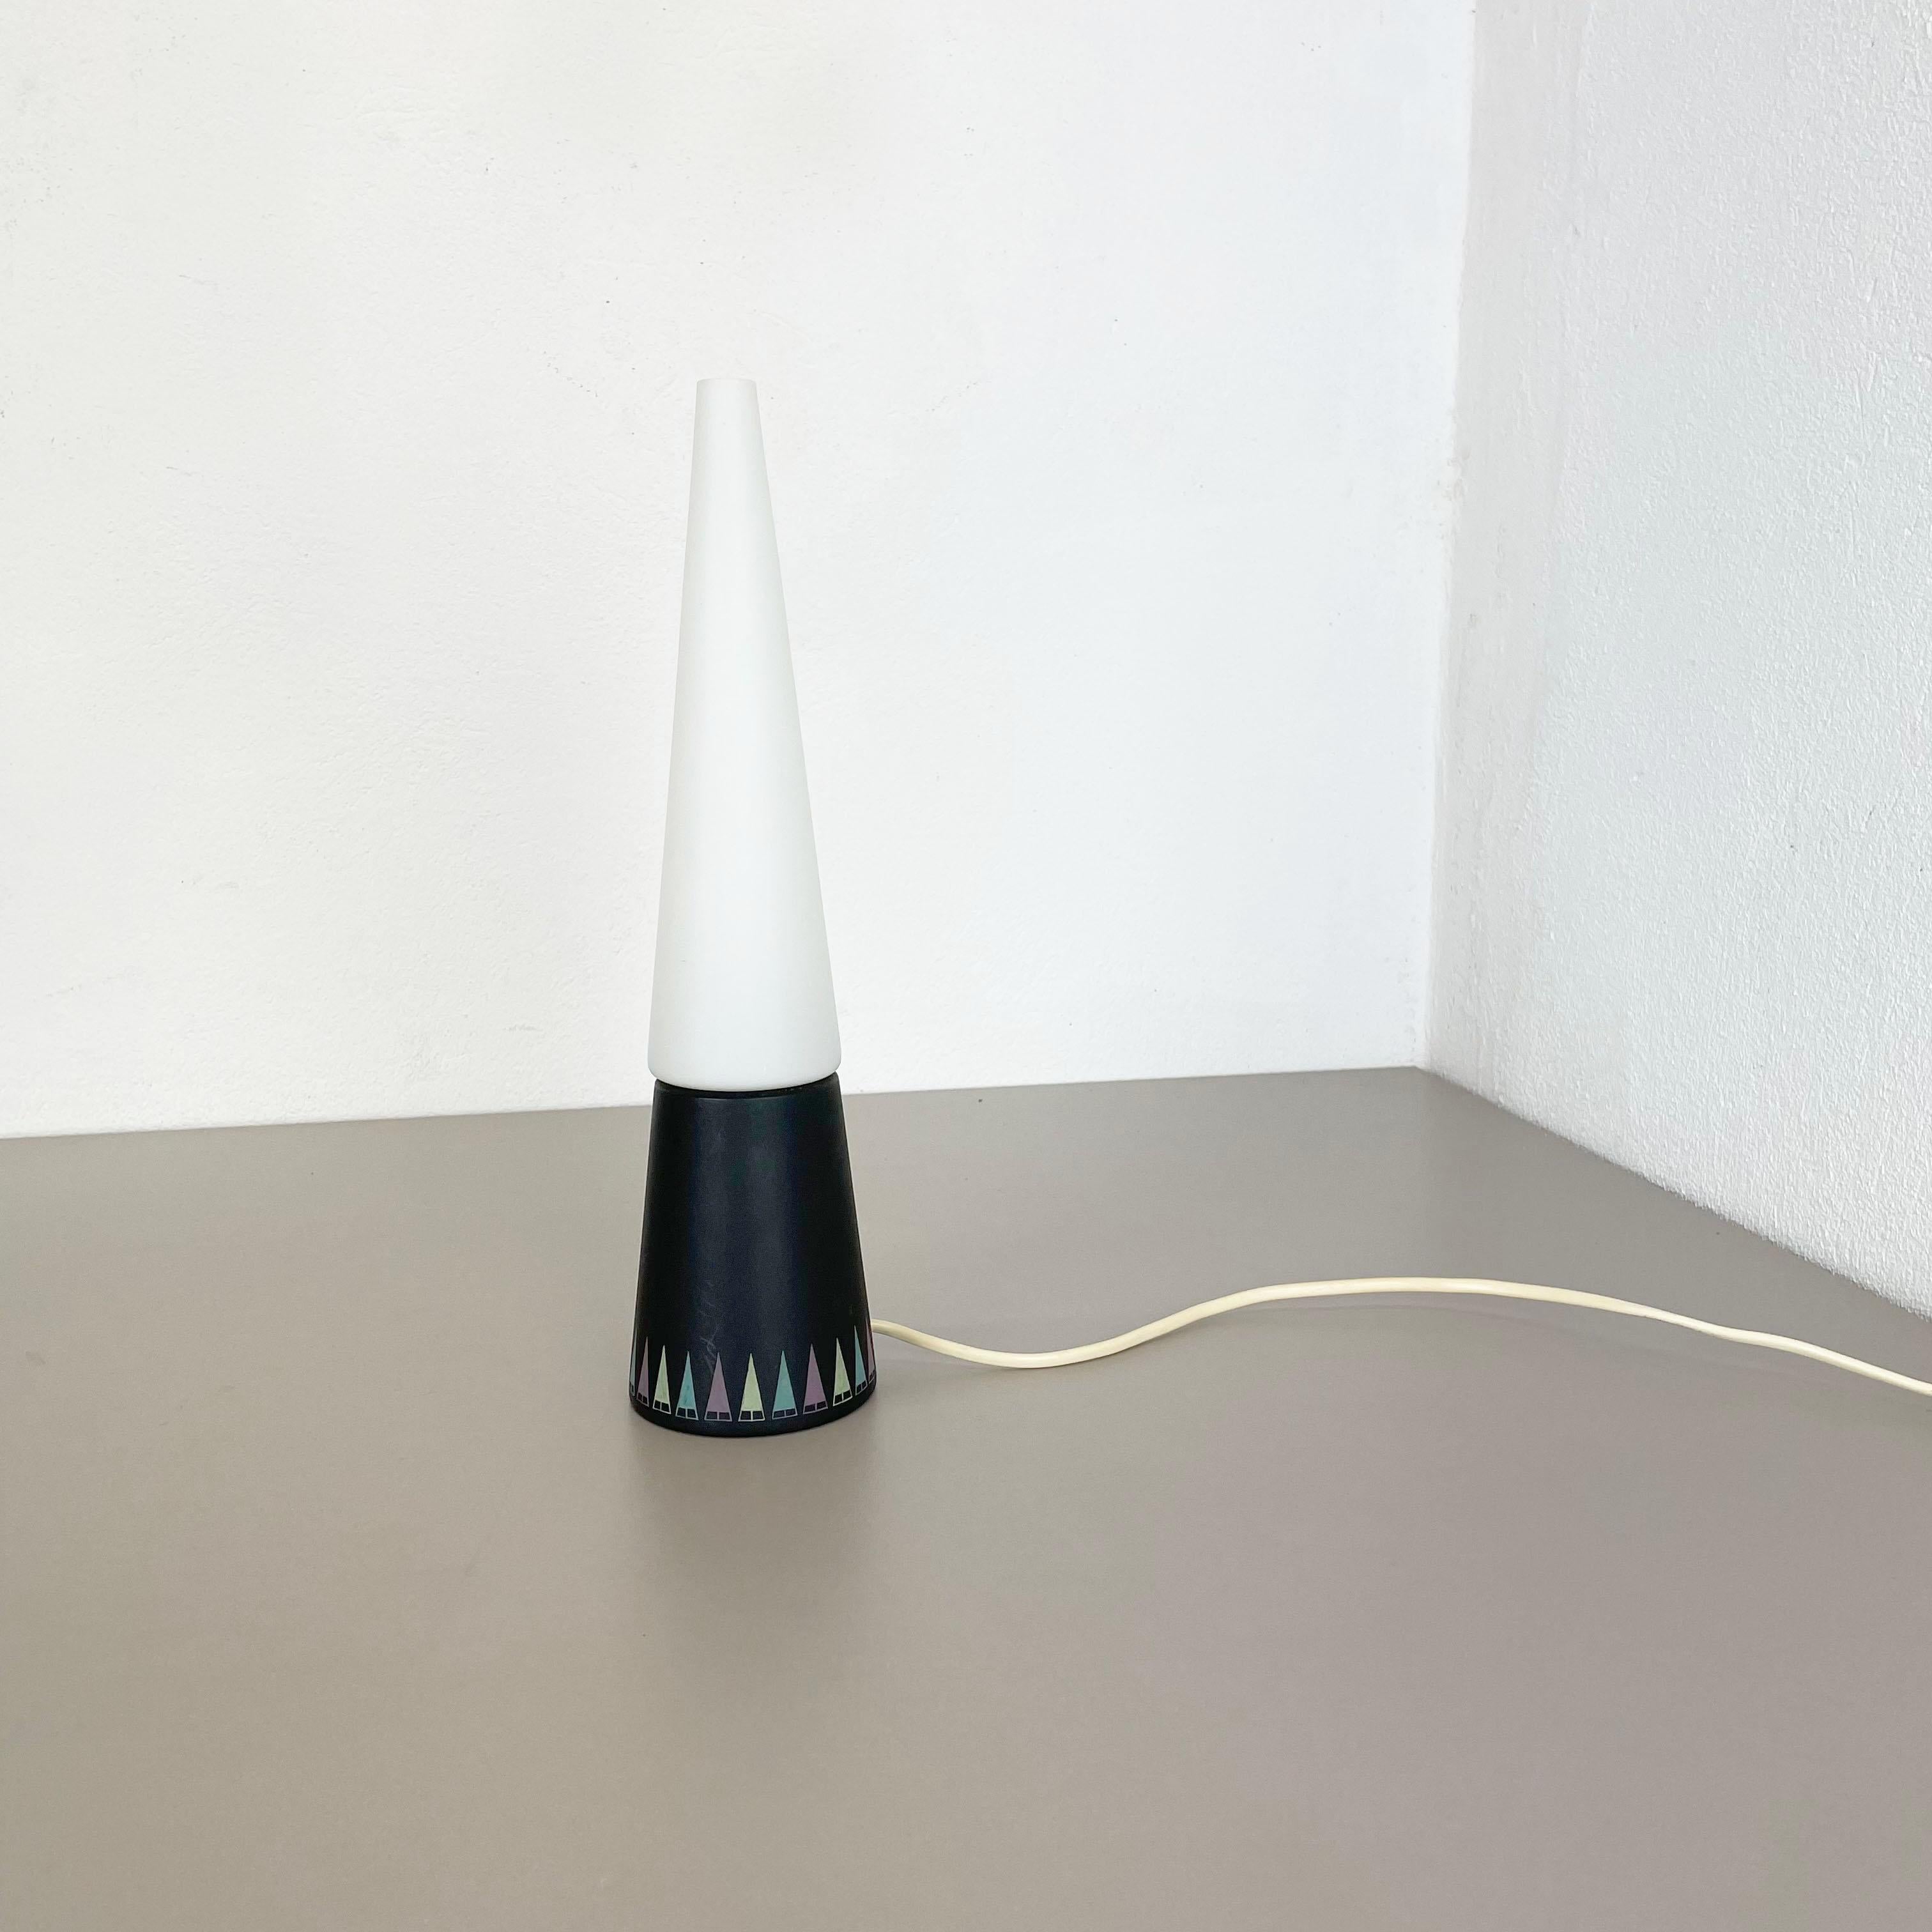 Article:

table light


Design:

Hans-Agne Jakobsson


Producer:

Hans-Agne Jakobsson AB, Sweden





This table light was designed by Hans-Agne Jakobsson in the 1960s and produced by his own company, Hans Agne Jakobsson A. B. in